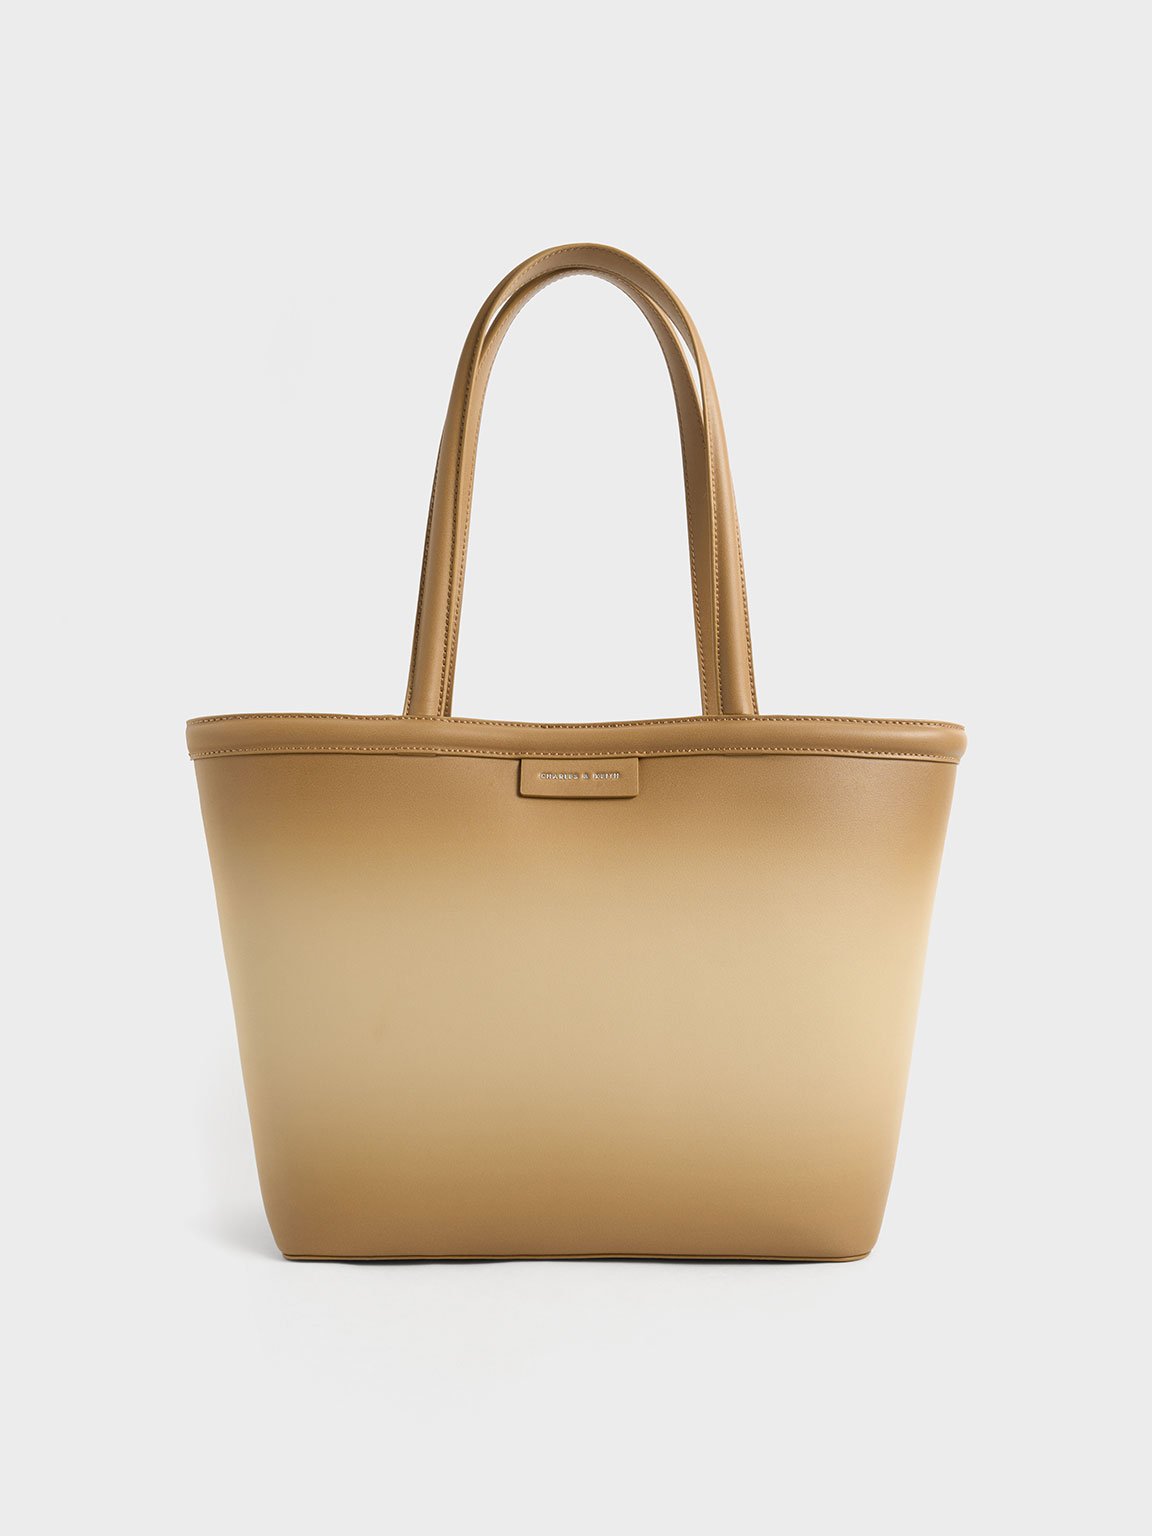 Charles & Keith Women's Ombre Tote Bag